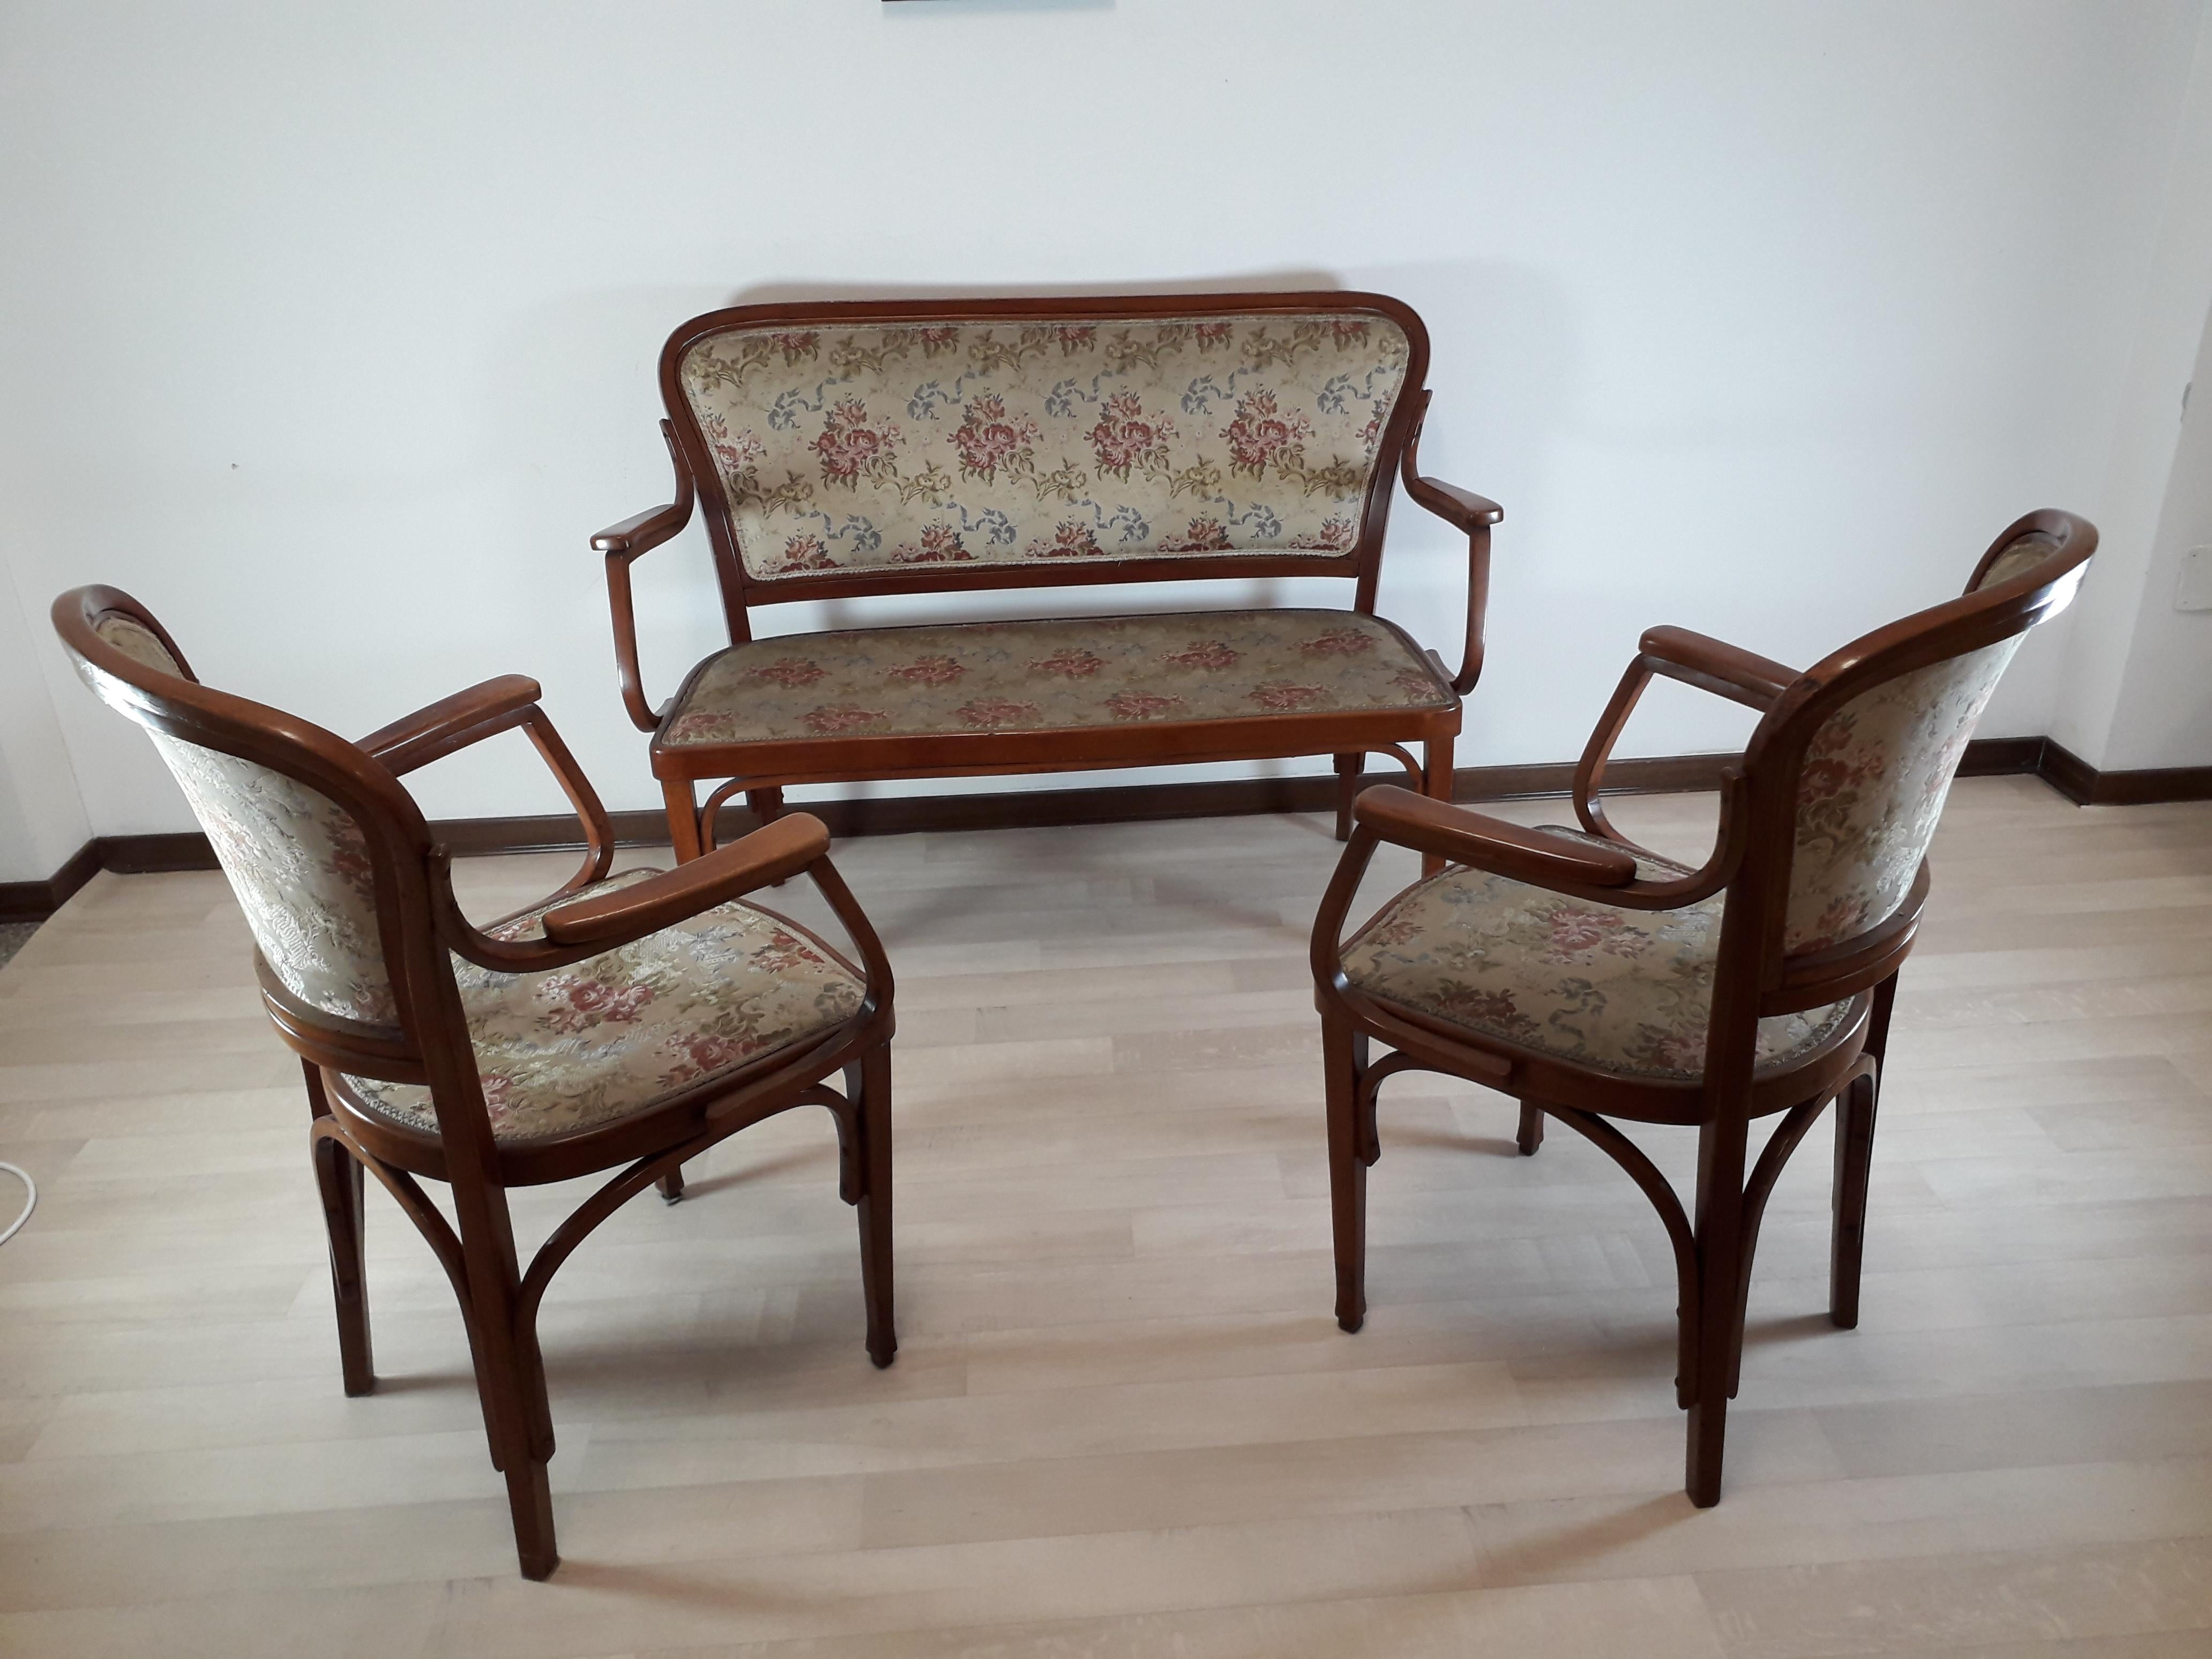 Superb and rare sitting room from the J. & J. Kohn company on a design by the architect Gustav Siegel.
This sitting room was purchased at a well-known auction house in Italy.
Excellent condition of the structure. Advisable to change the